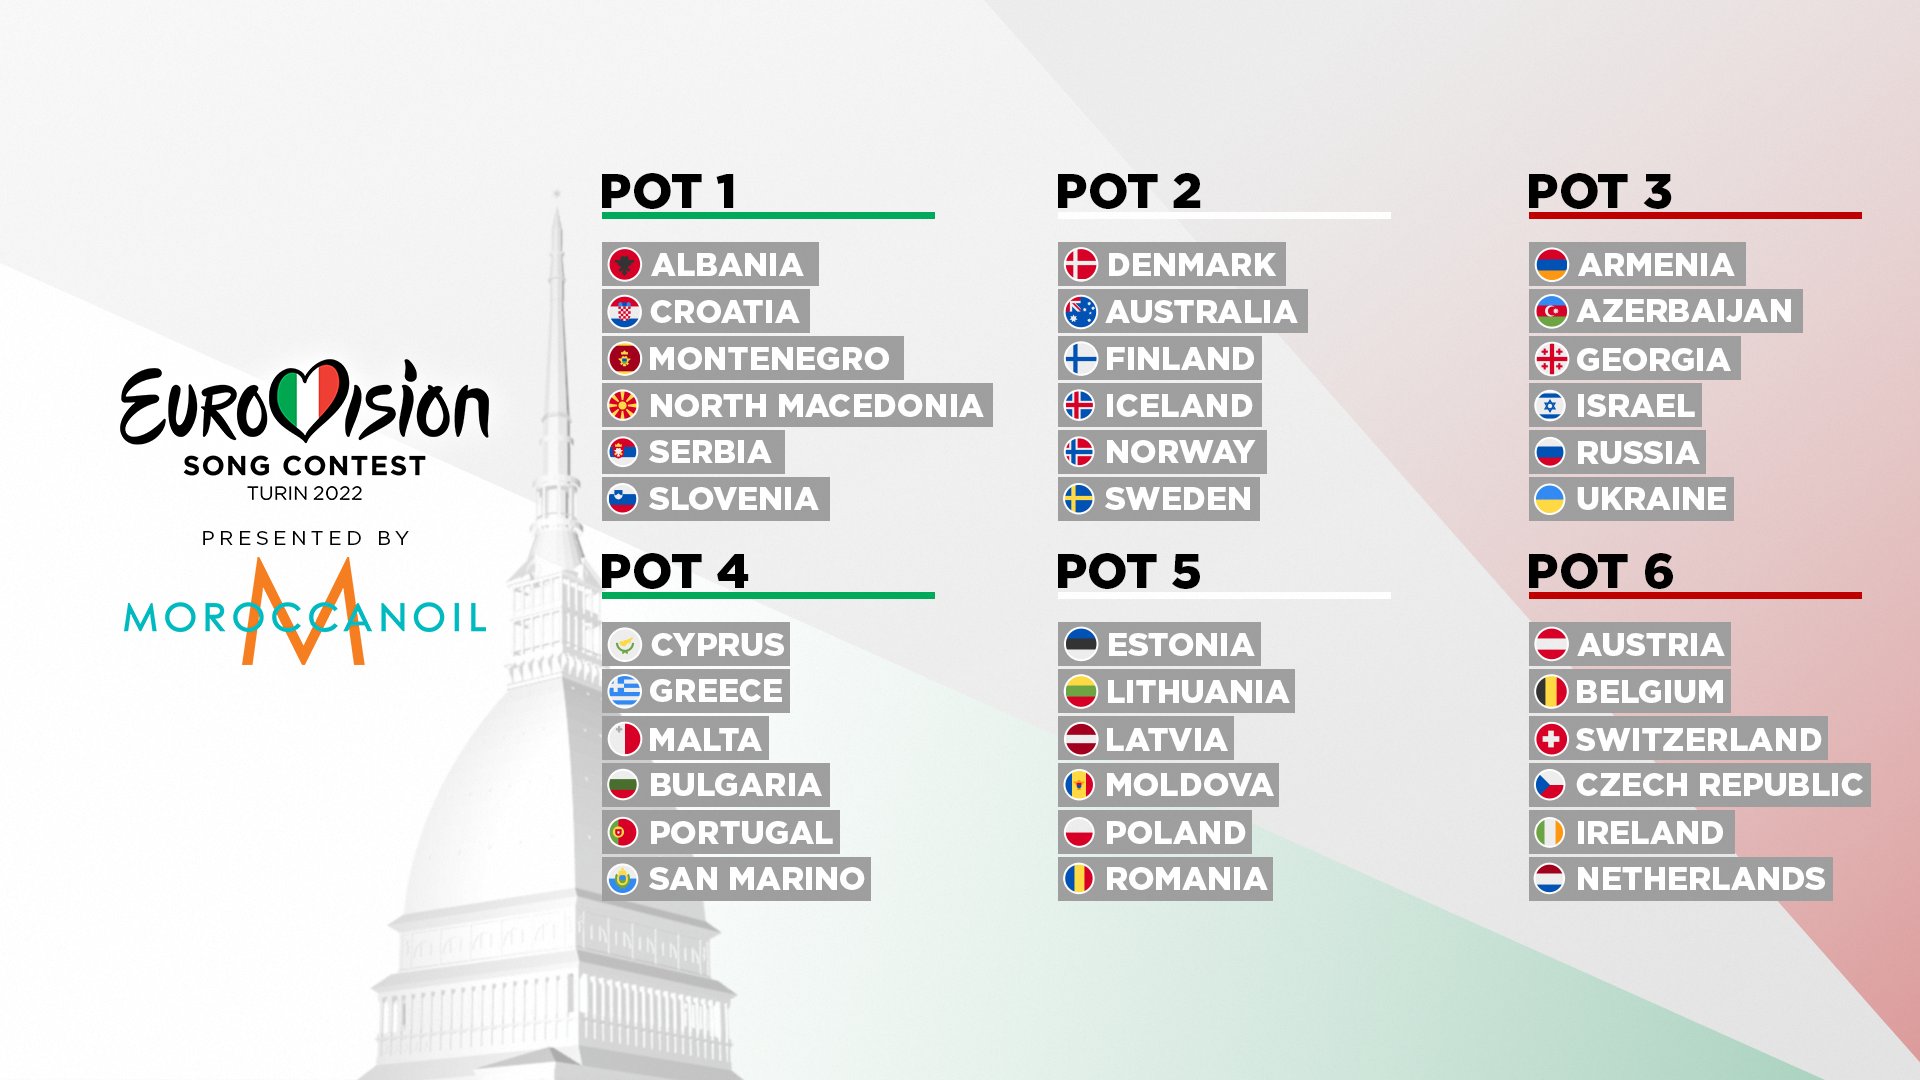 Eurowizja 2022 Eurovision Song Contest on X: "The Semi-Final Allocation Draw for  #Eurovision 2022 takes place next week in beautiful Turin! 🇮🇹 ⬇️ Here's  how the pots look! 🌟 Find out how the draw